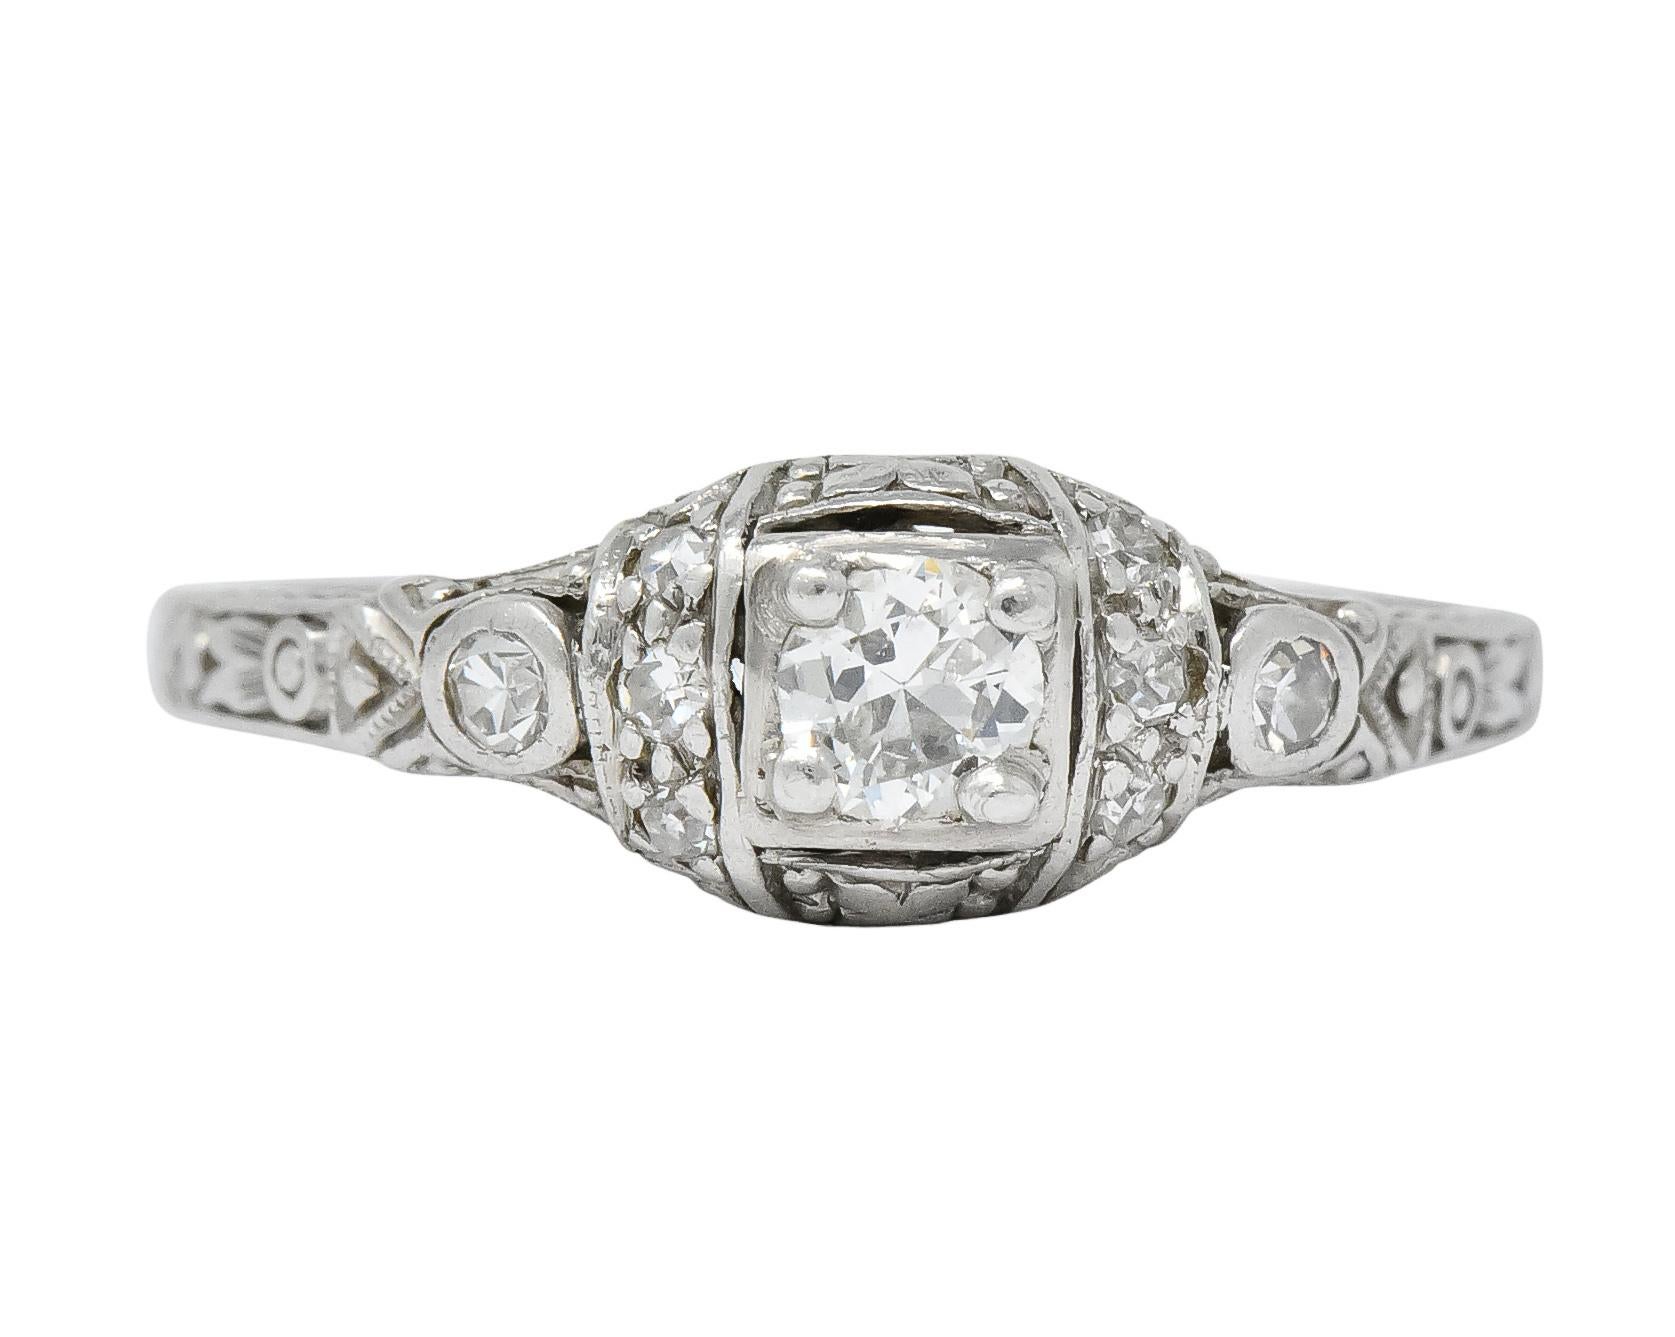 Centering a transitional cut diamond weighing approximately 0.15 carat, I/J color and SI clarity

Accented by channel set and bezel set single cut diamonds on each side, total diamond weight approximately 0.15 carat, eye-clean and white

Square form